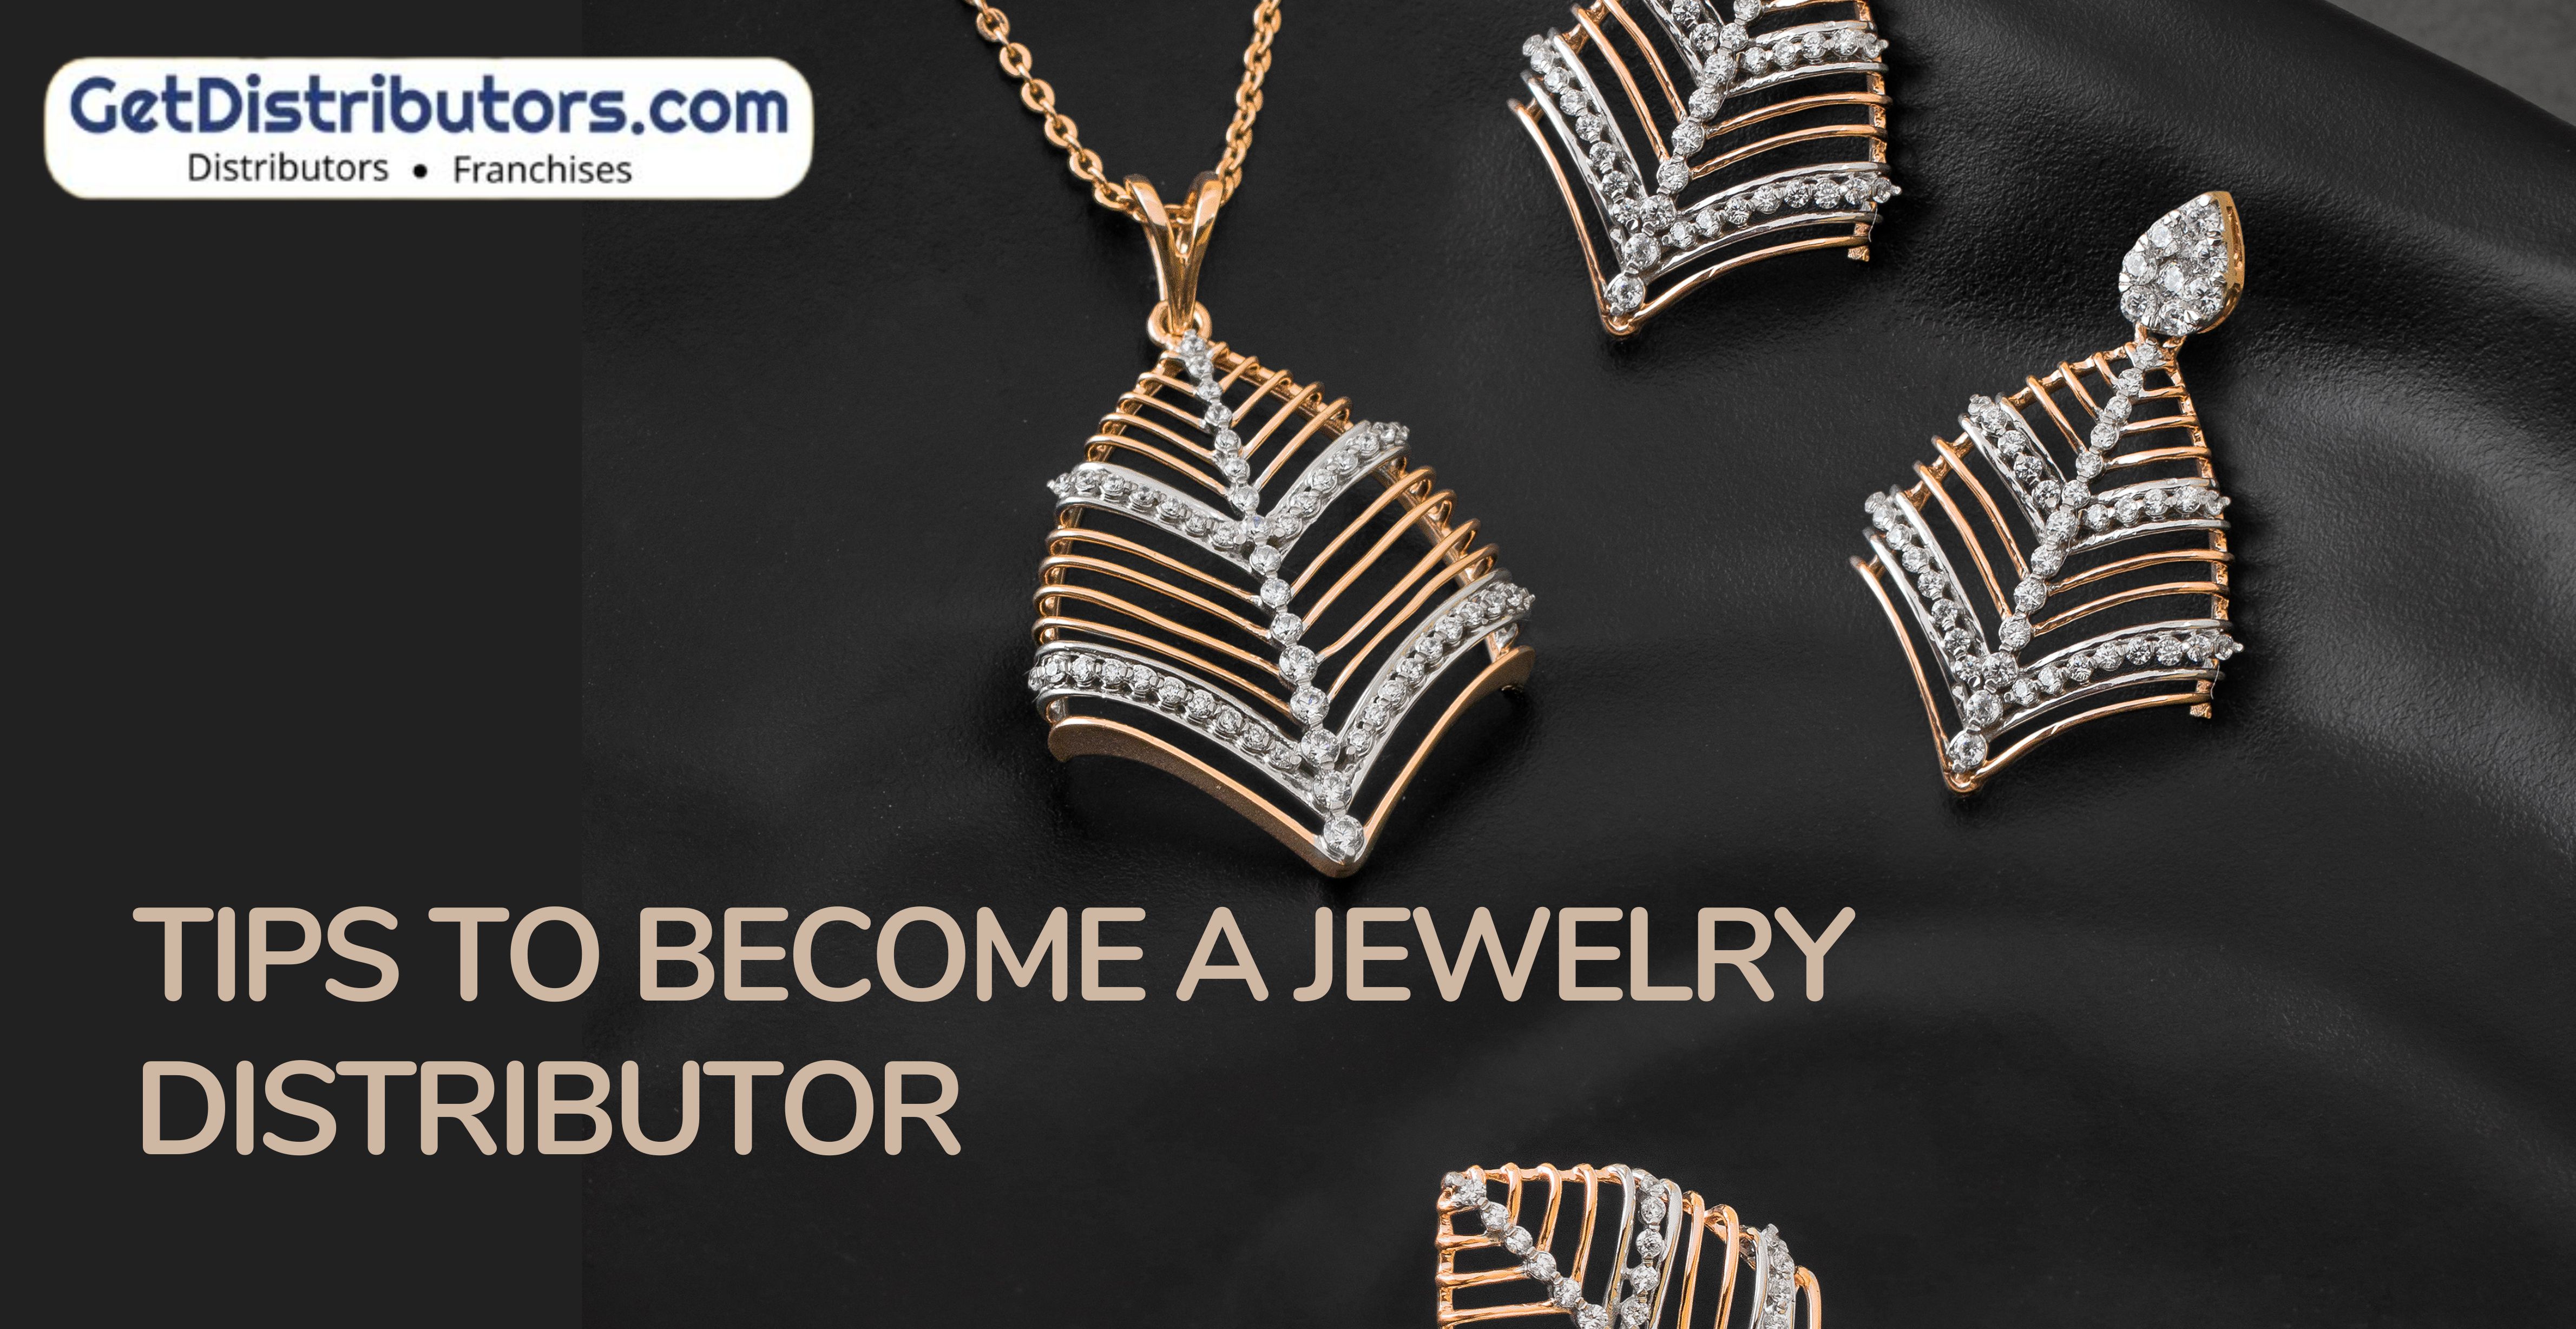 Tips To Become A Jewelry Distributor